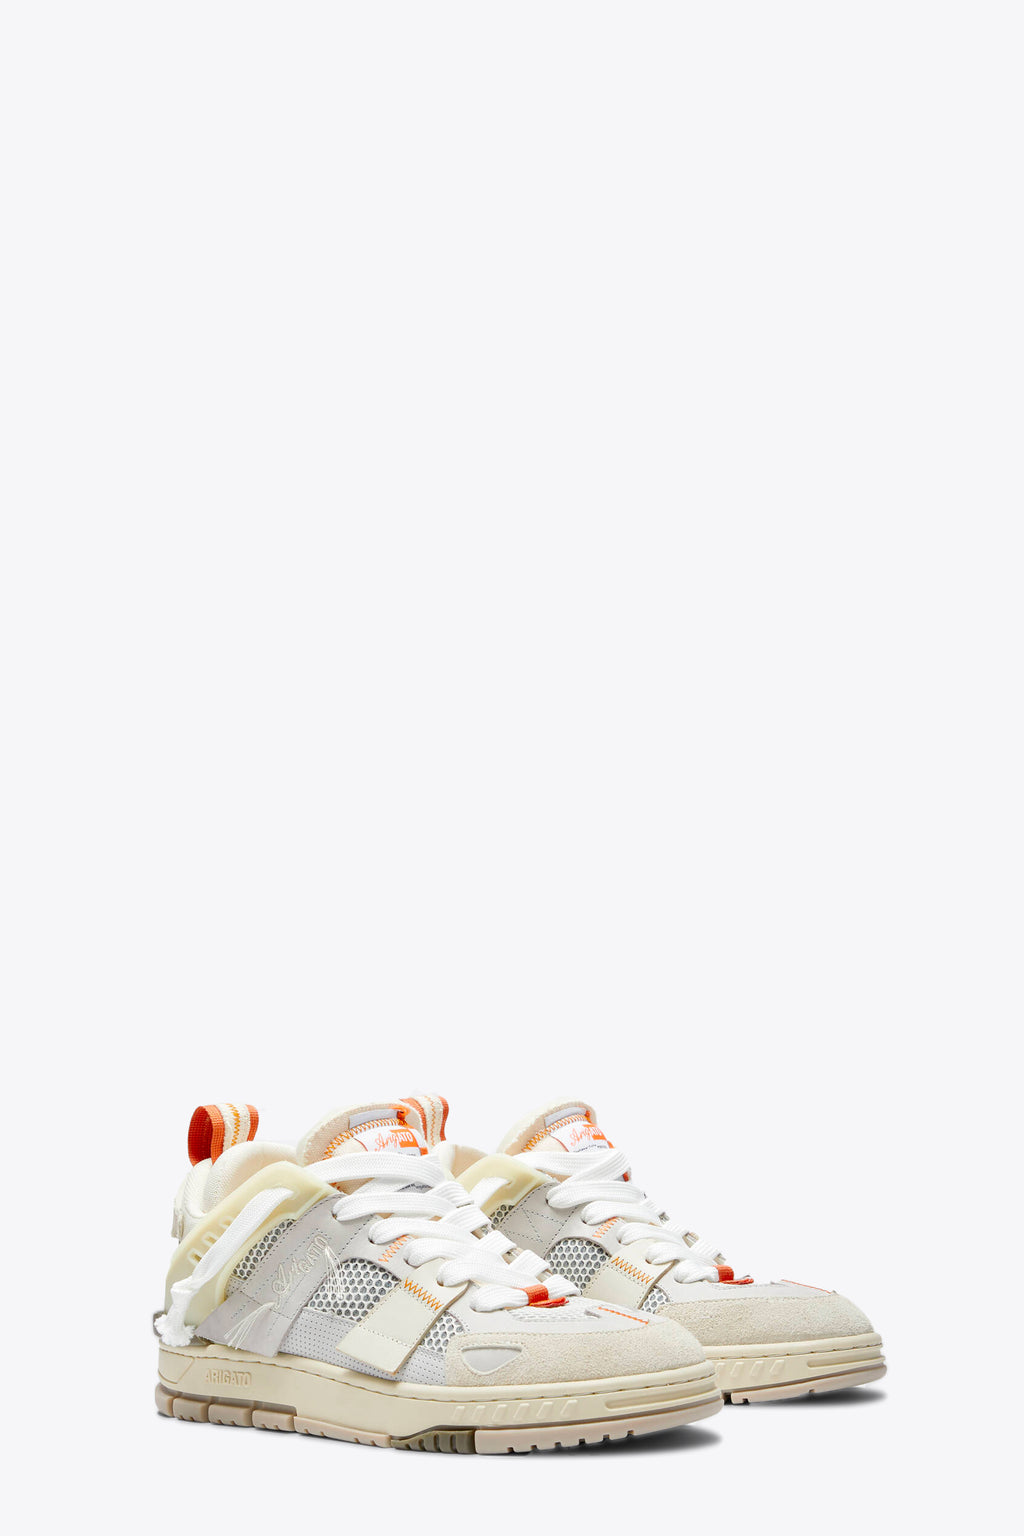 alt-image__Off-white-and-beige-low-sneaker---Area-Patchwork-Sneaker-